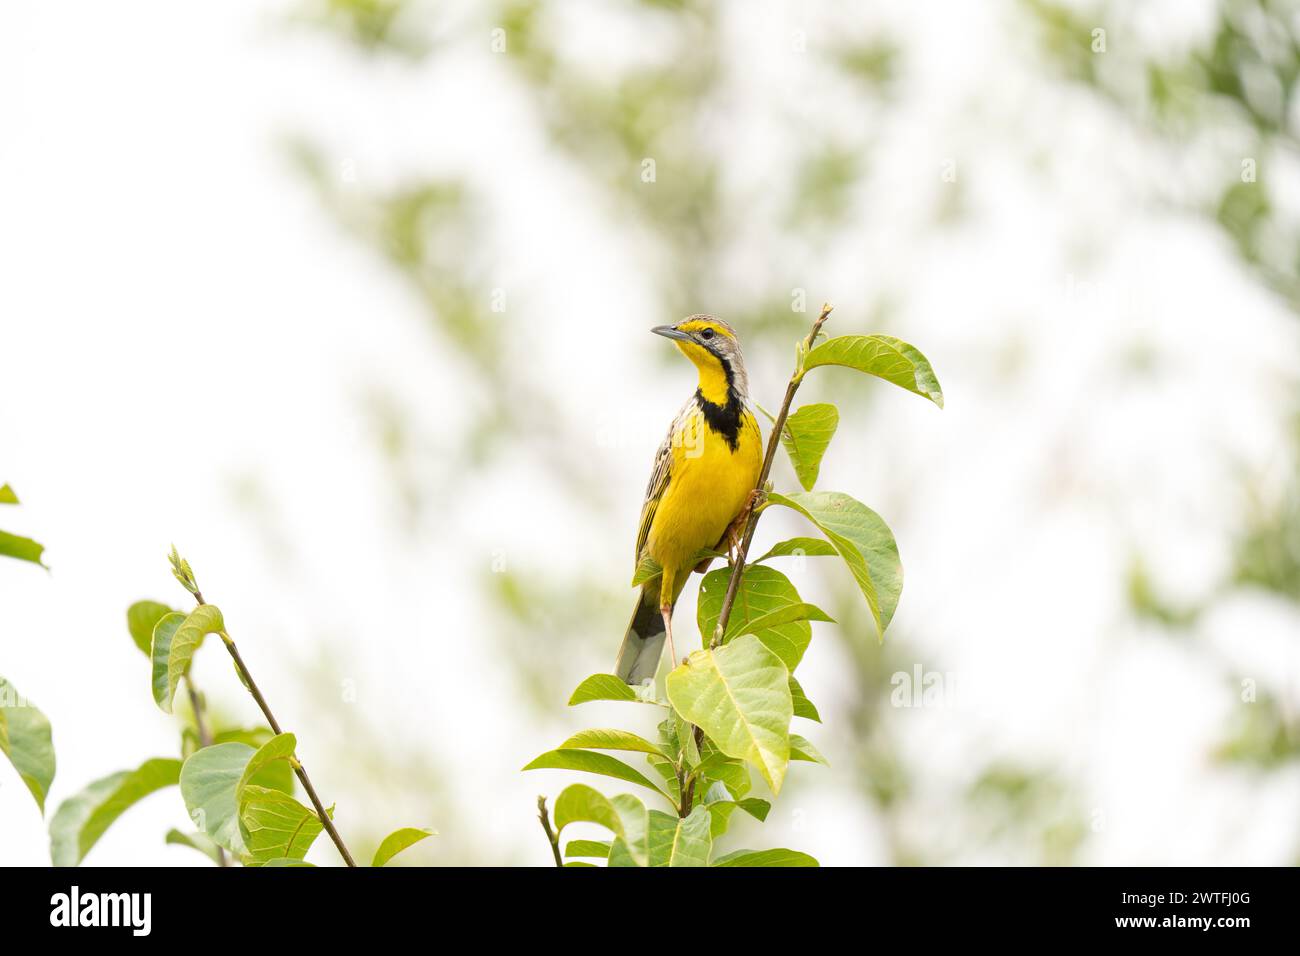 Yellow throated longclaw in Queen Elizabeth national park. Macronyx croceus in the bushes. Safari in Uganda. Yellow bird on the top of branch. Stock Photo